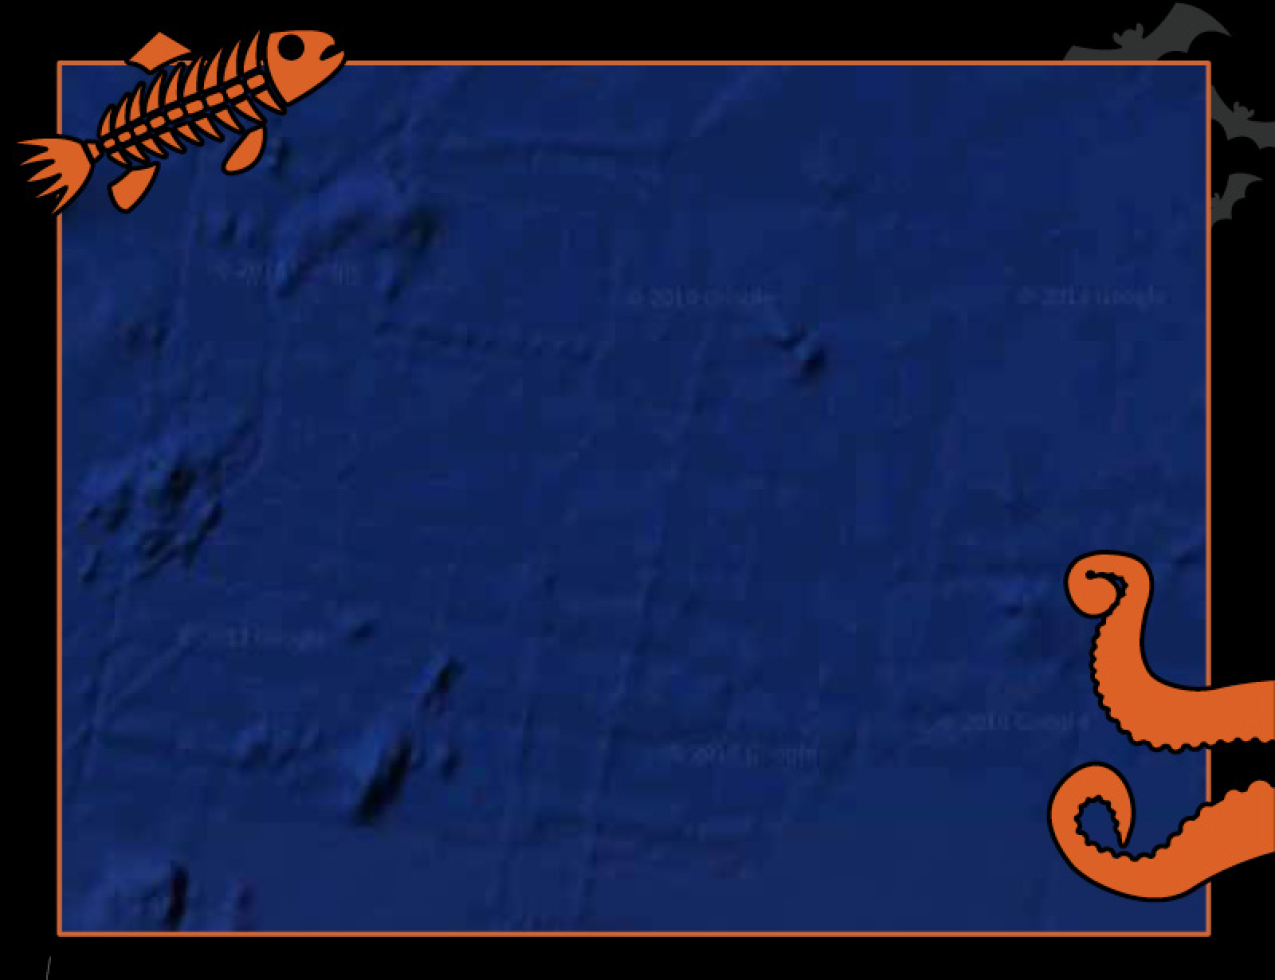 The lines seen here show the paths taken by ships using sonar to map small sections of the ocean floor in greater detail. Border of the photo is black with orange sea creature graphics of octopus tentacles and a fish skeleton. Text: Did I find Atlantis? #NOAASpookyScience with NOAA logo.